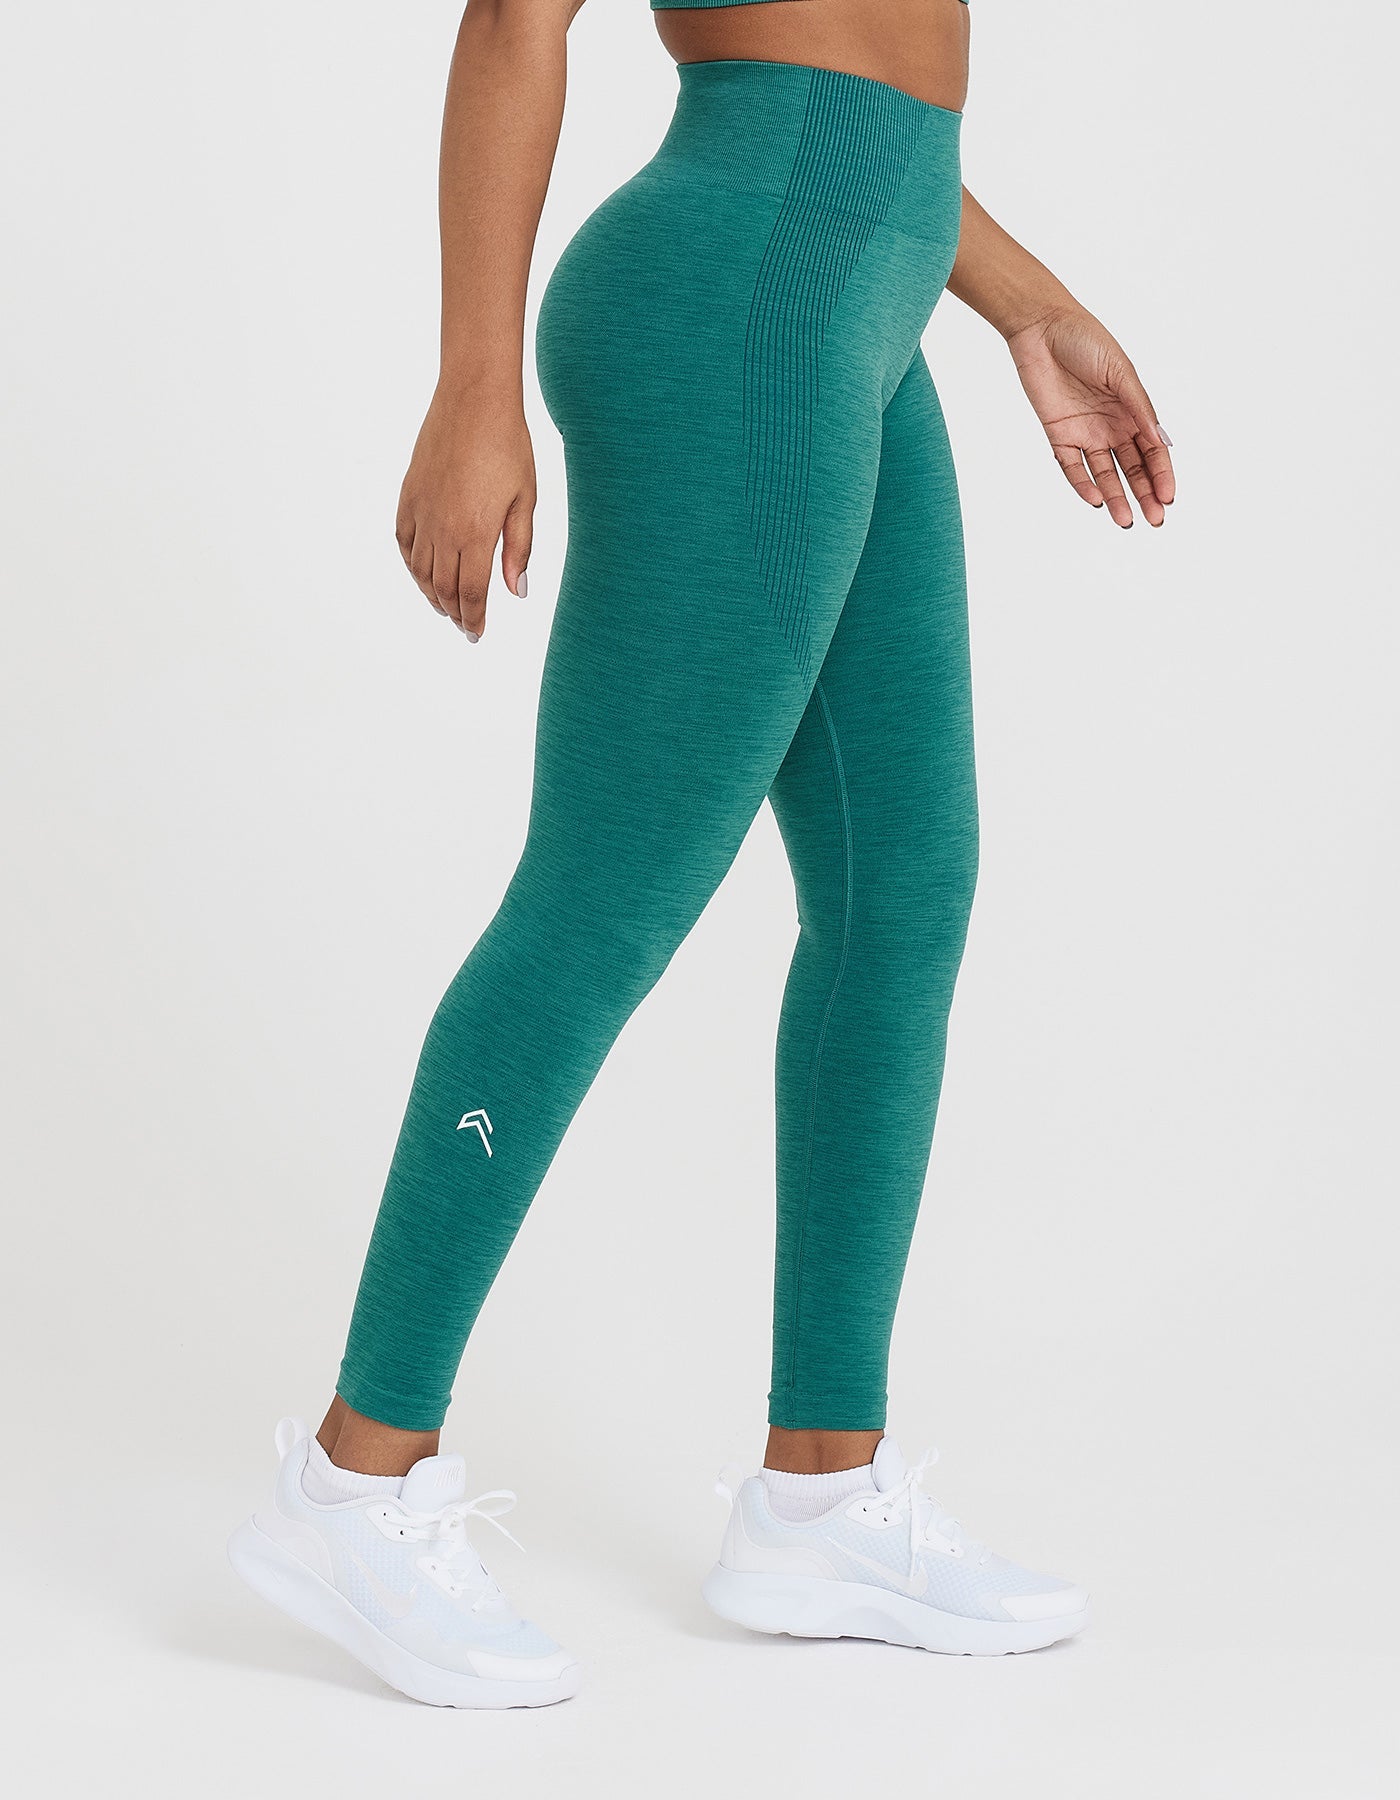 High Waist Seamless Oner Active Leggings For Running, Yoga, And Gym  Workouts Solid Color Athletic Trousers For Women From Zbzt, $22.53